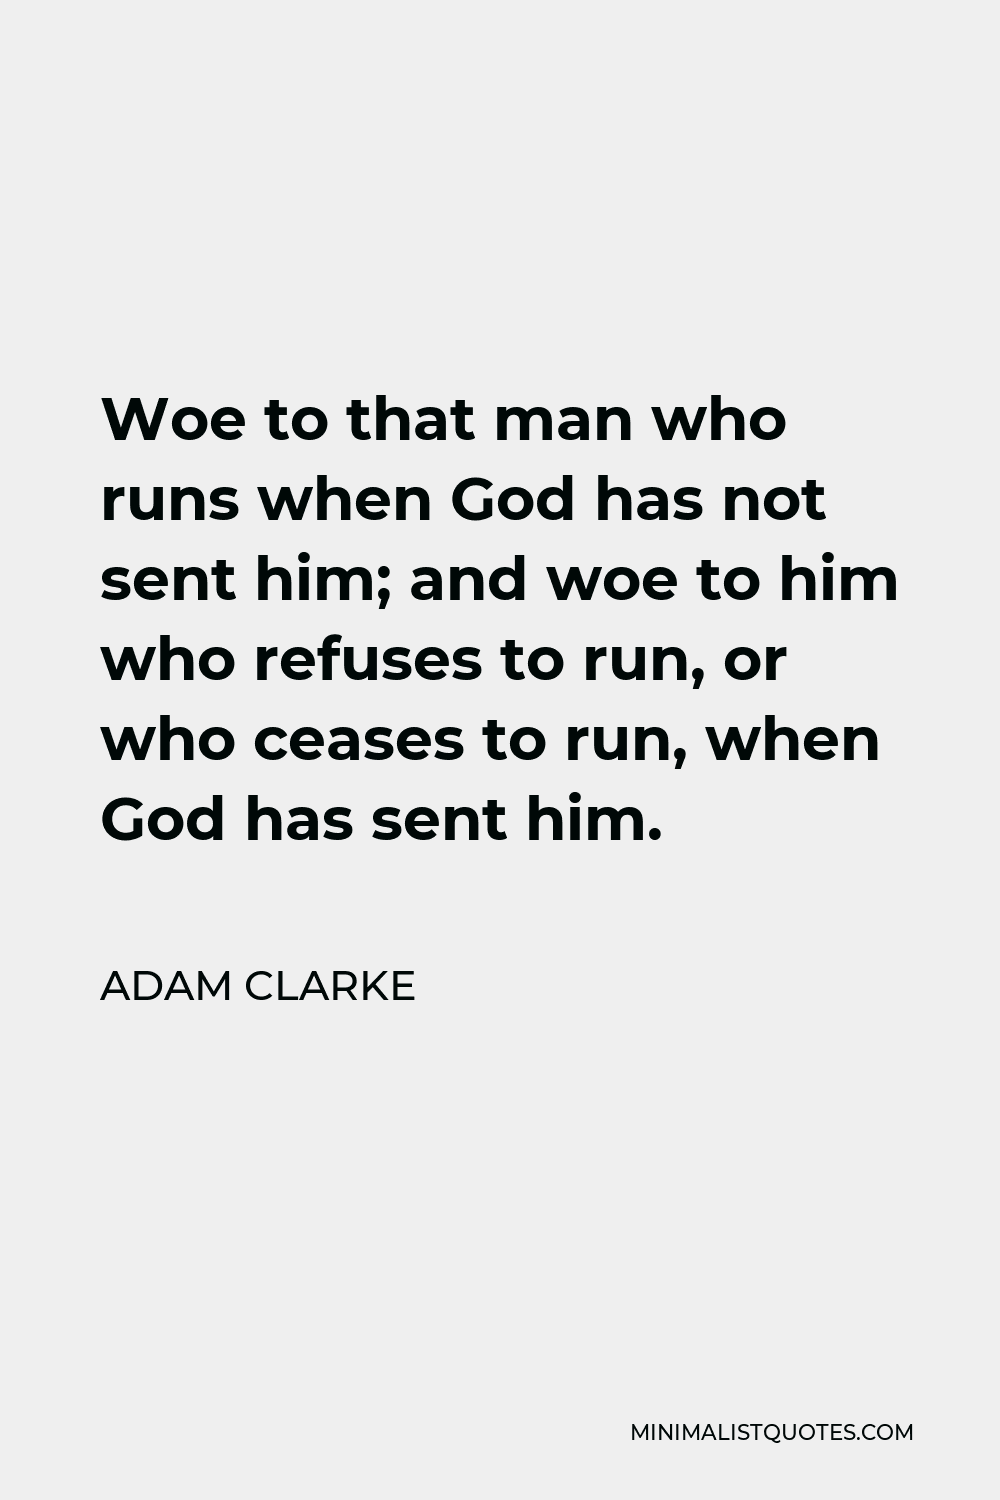 Adam Clarke Quote - Woe to that man who runs when God has not sent him; and woe to him who refuses to run, or who ceases to run, when God has sent him.